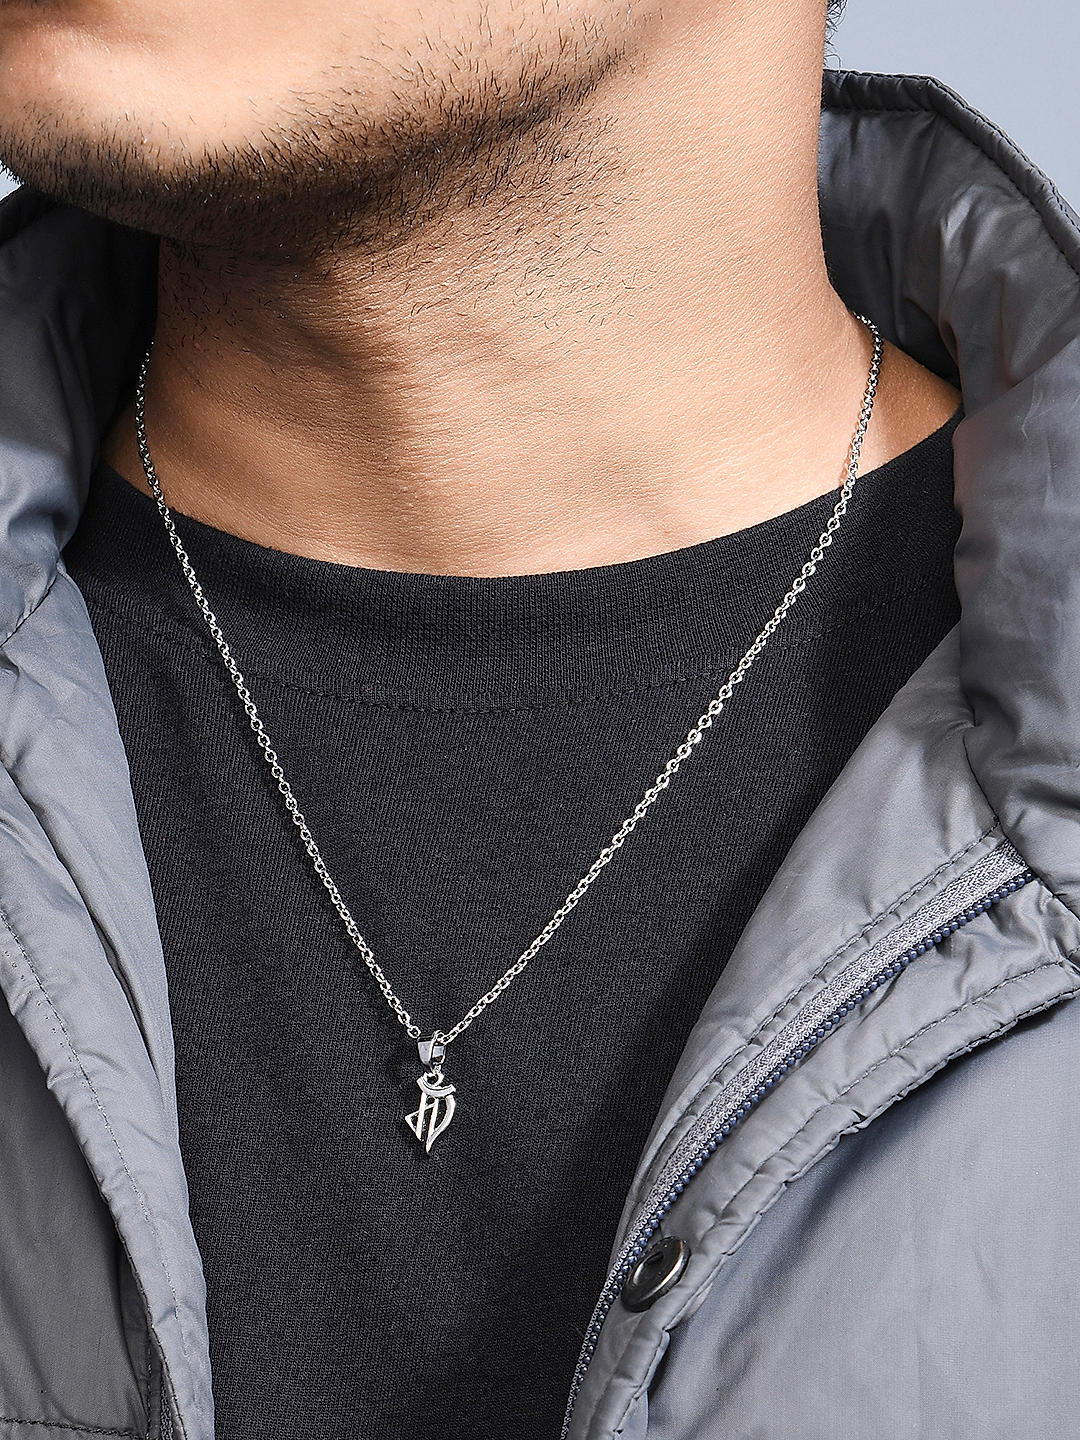 Personalised Silver Necklaces for Men | Fast Delivery in the UK | Silvery